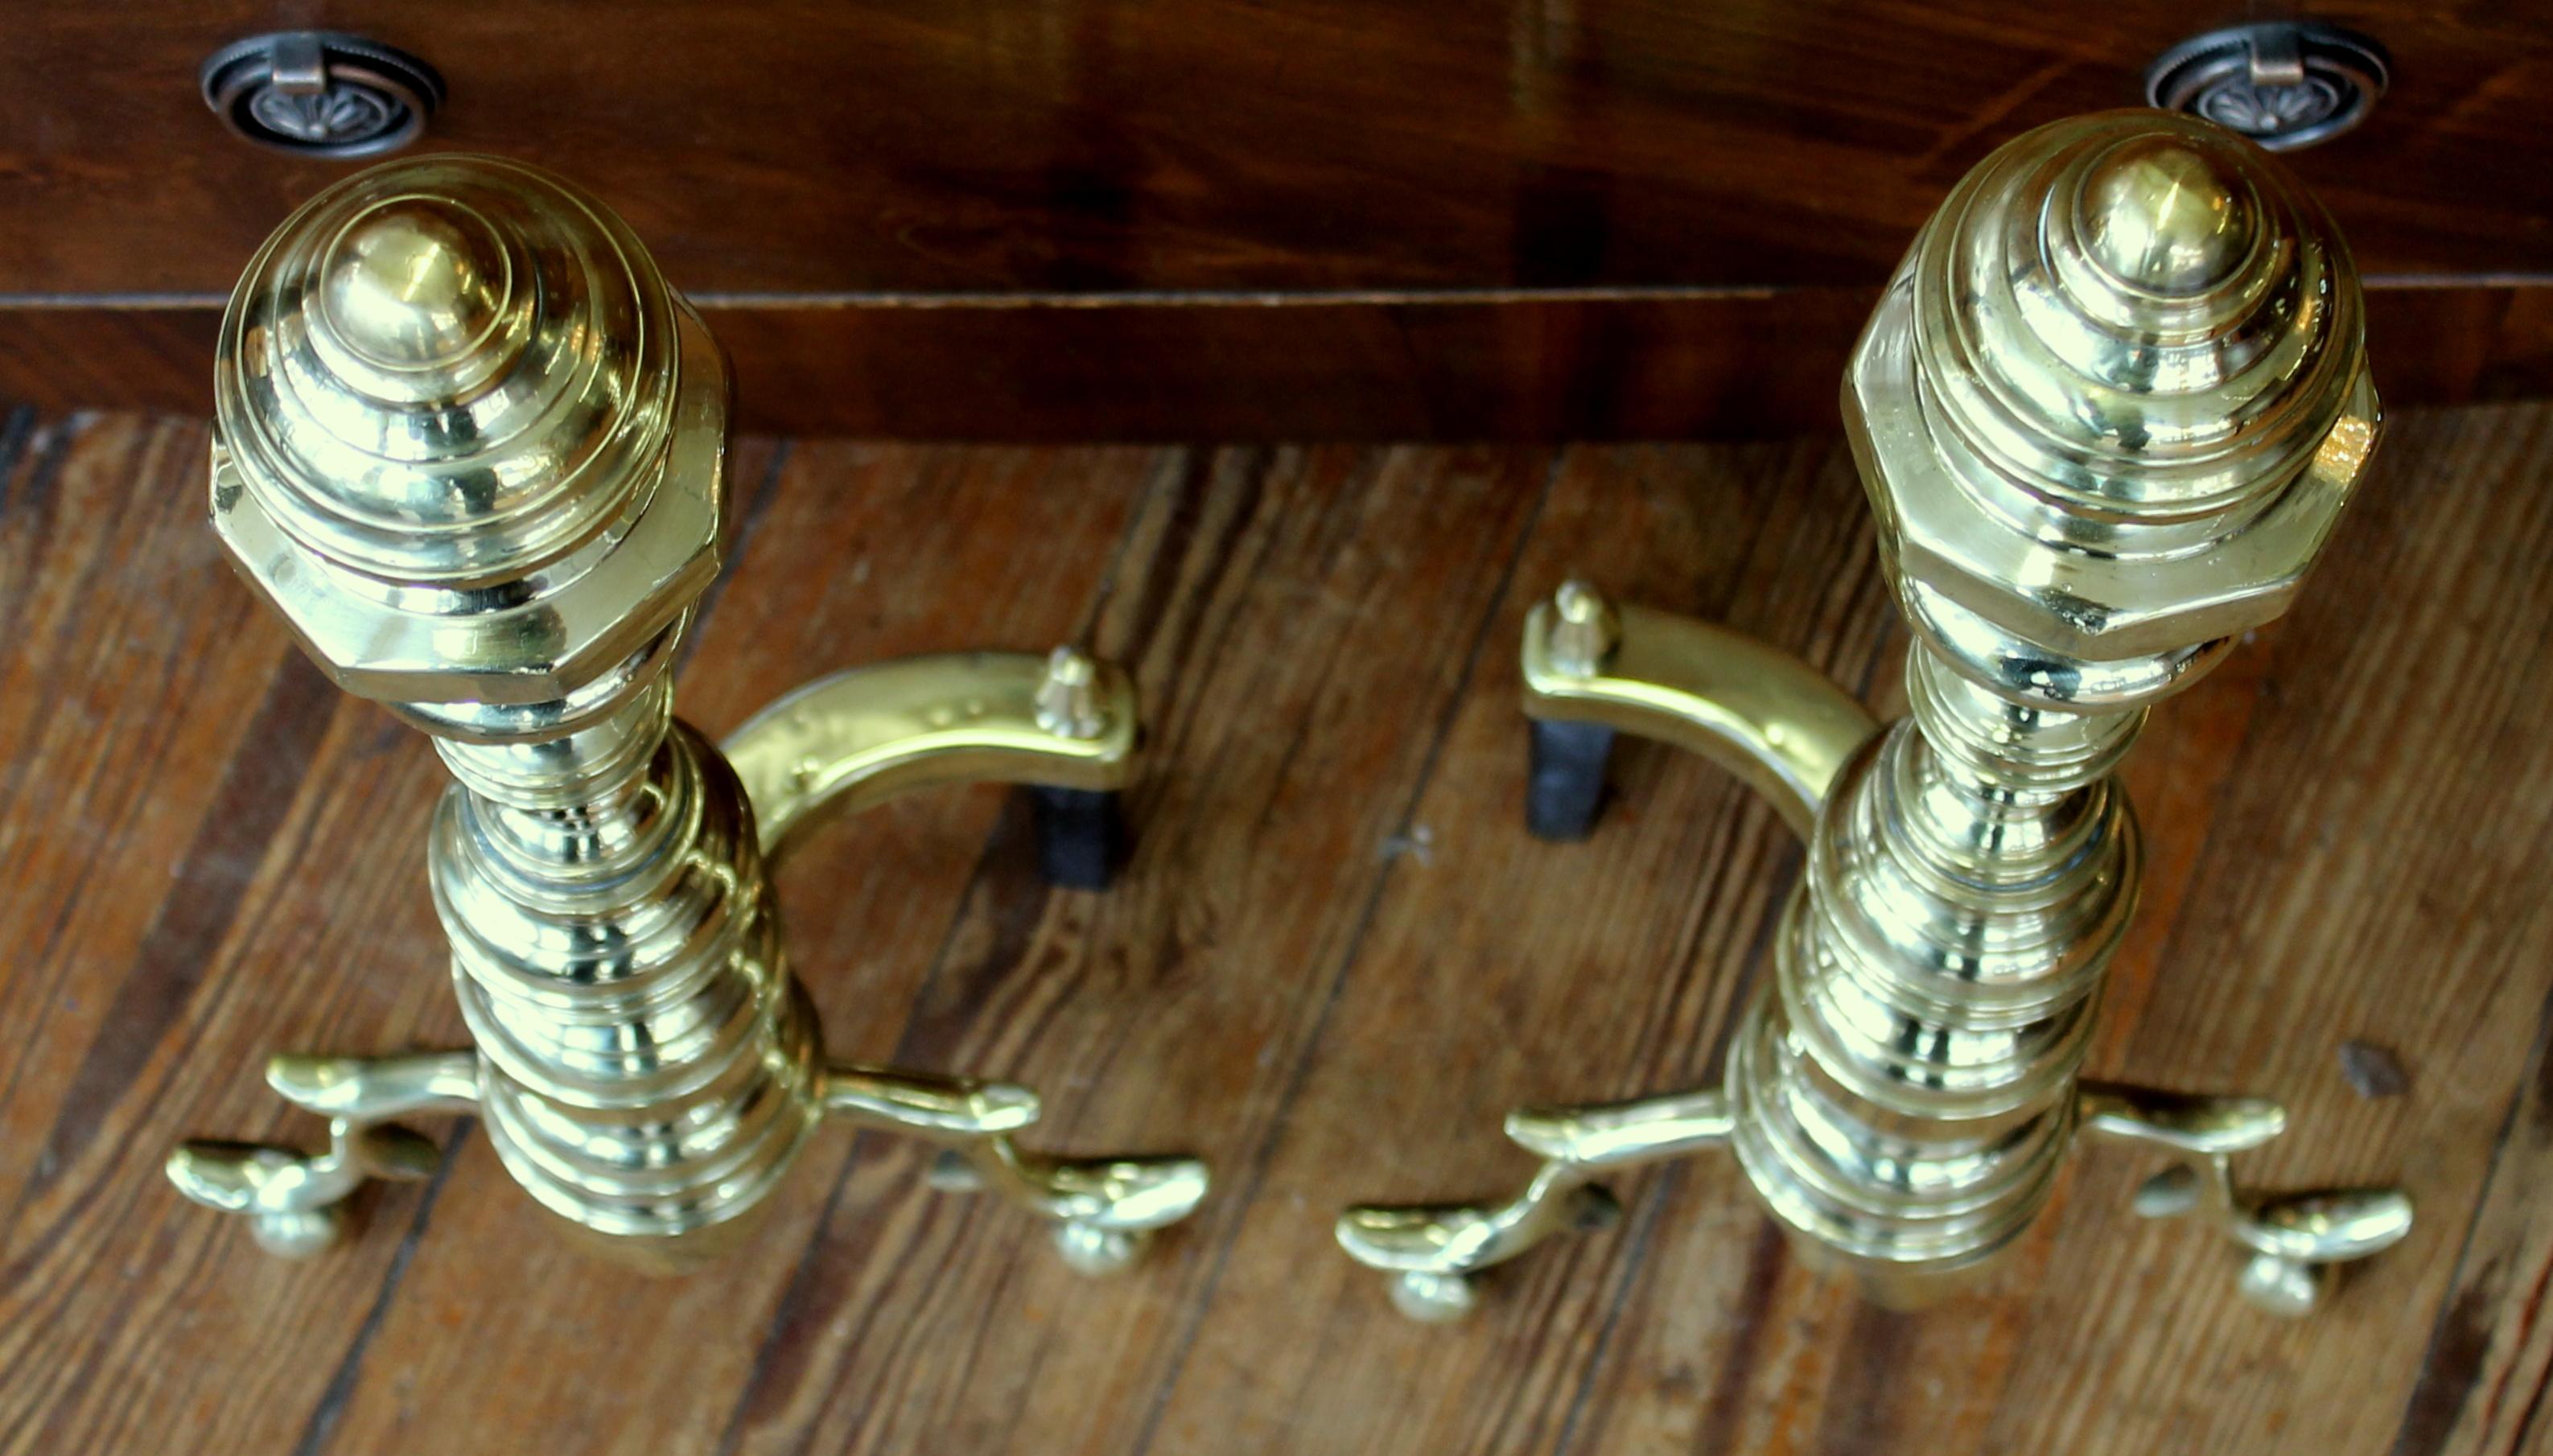 Pair of fabulous quality old American cast brass Federal style andirons; heavy cast brass components with no cast iron returns (as made).